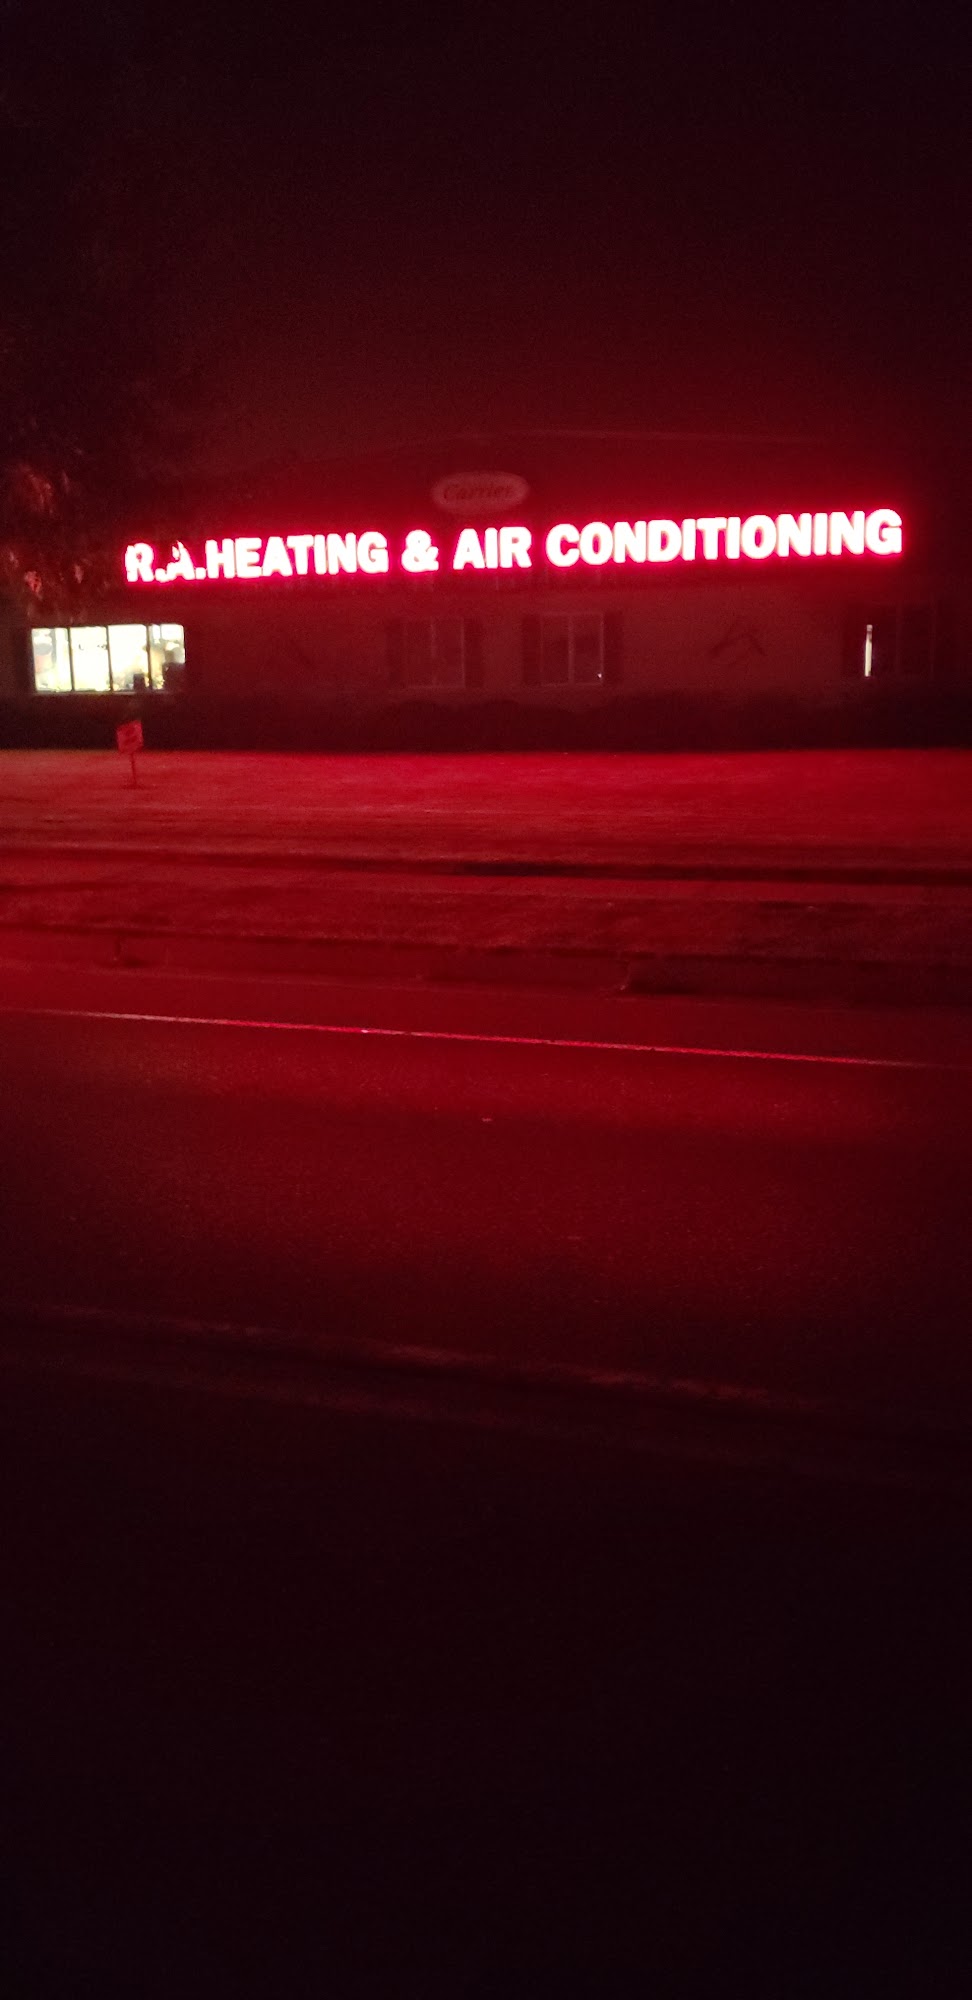 R.A. Heating & Air Conditioning 598 Water St, Evansville Wisconsin 53536